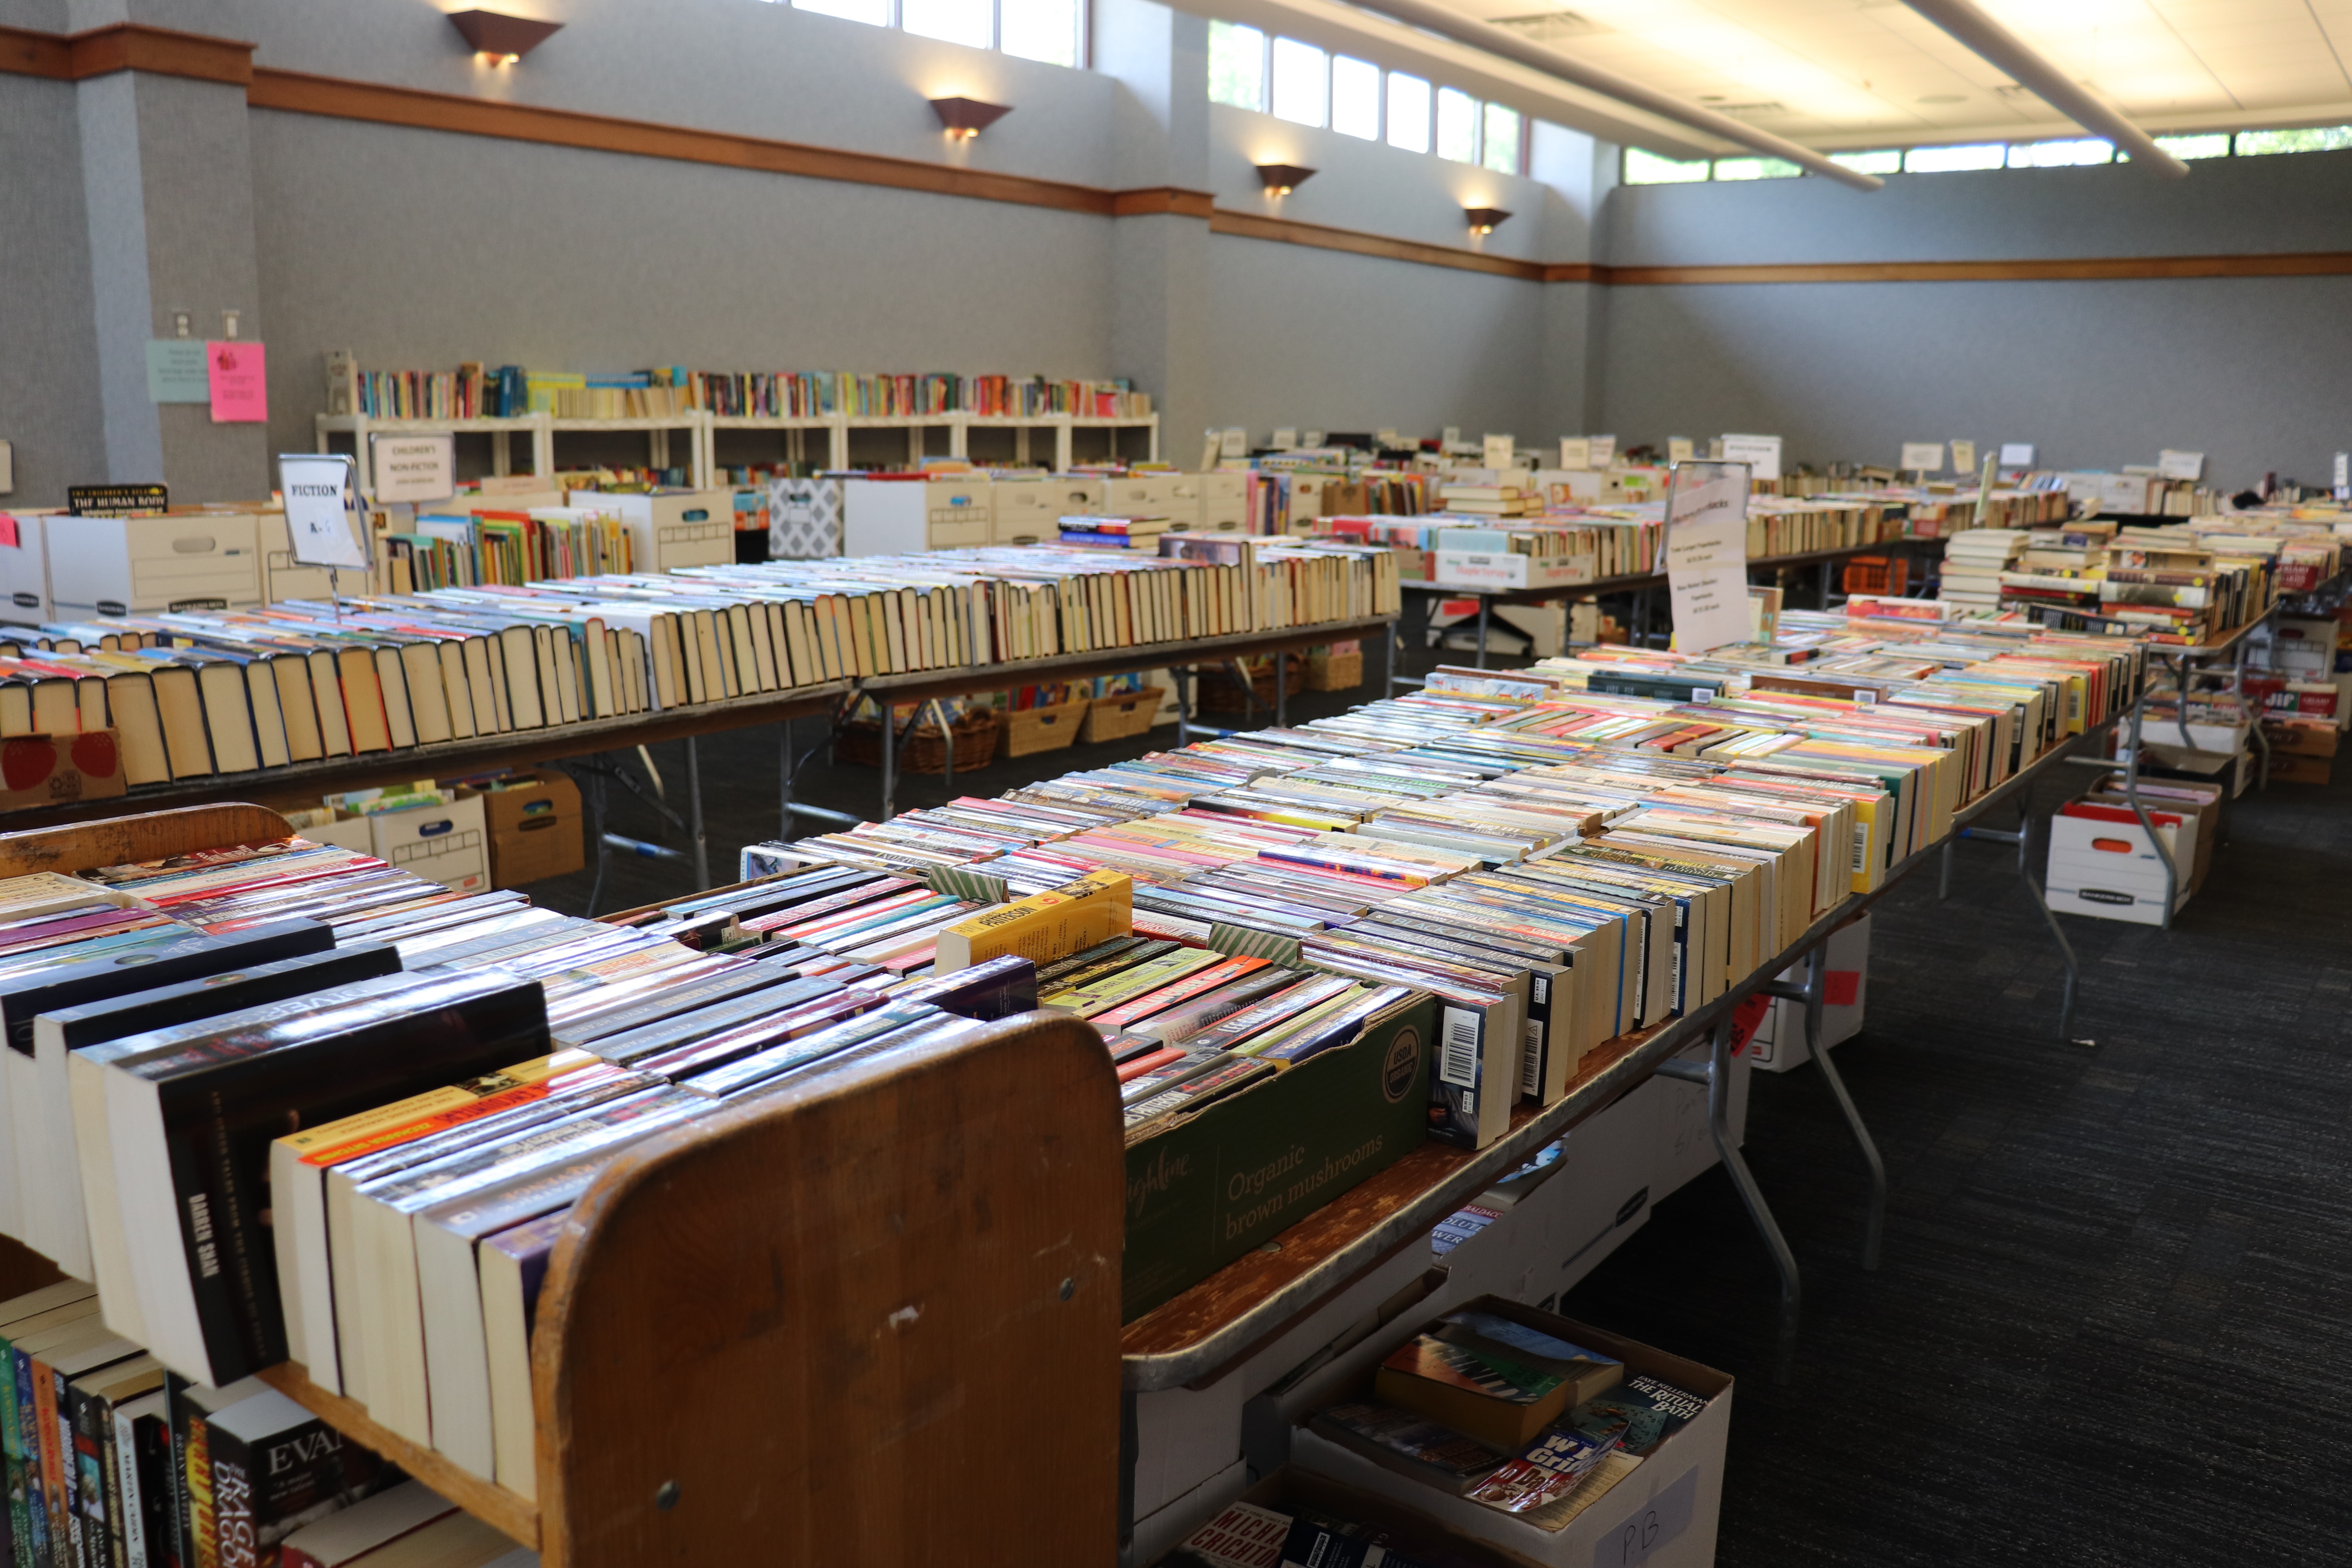 The meeting room filled with books on tables, carts, and shelves